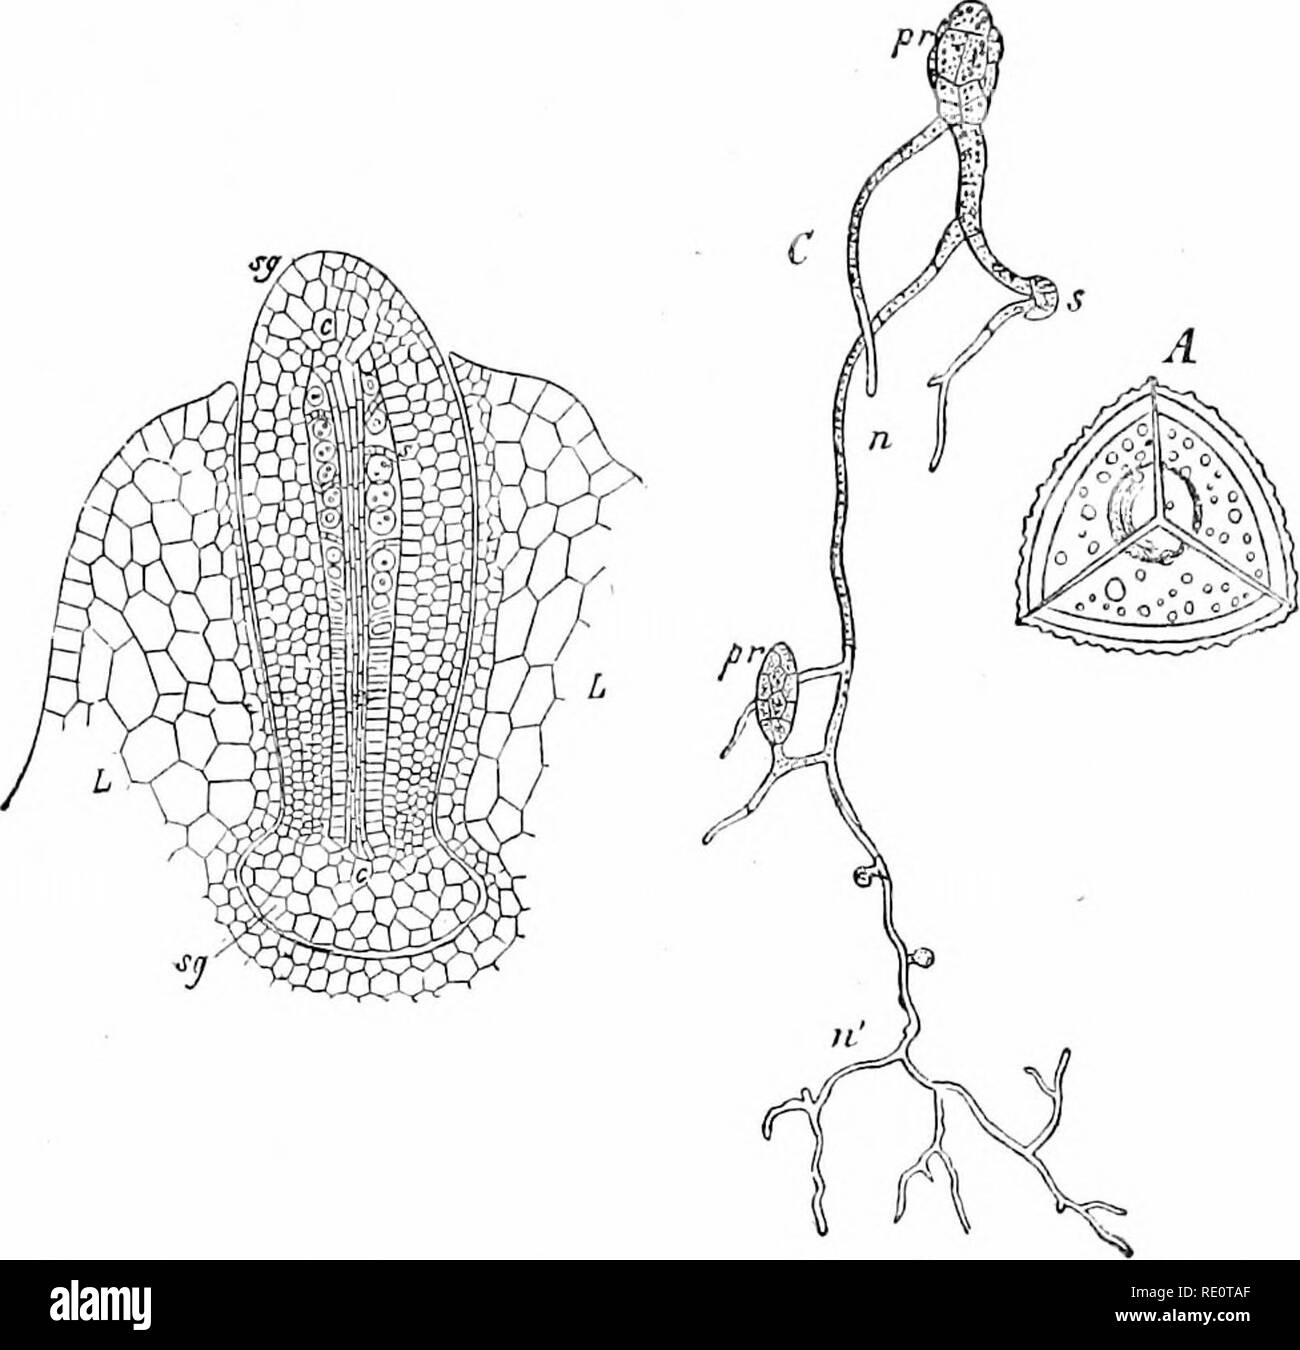 . Plants and their uses; an introduction to botany. Botany; Botany, Economic. THE TRUE MOSSES 523. Fig. 345.—Horned-liverwort. Younj; sporophyte {.^ij, i&lt;ij) showing the be- ginnings of a columella (c, c) and spores (s). L, L, caij-ptra, -iJQ. (Hofmeister.) Fig. 346.—Peat moss (Sphagnum- ncutifolium, Peat moss Family, Sphagna- cecp). A, spore, highly magnified. C, spore (s) germinating in water producing a green branched thread or protonema (n, n') from whi^h buds (pr, pr) arise and produce gametophytes. (Schimper.)—-Plant common in bogs. Fig. 347. — Peat moss. Flat pro- tonema {pr, pr) pro Stock Photo